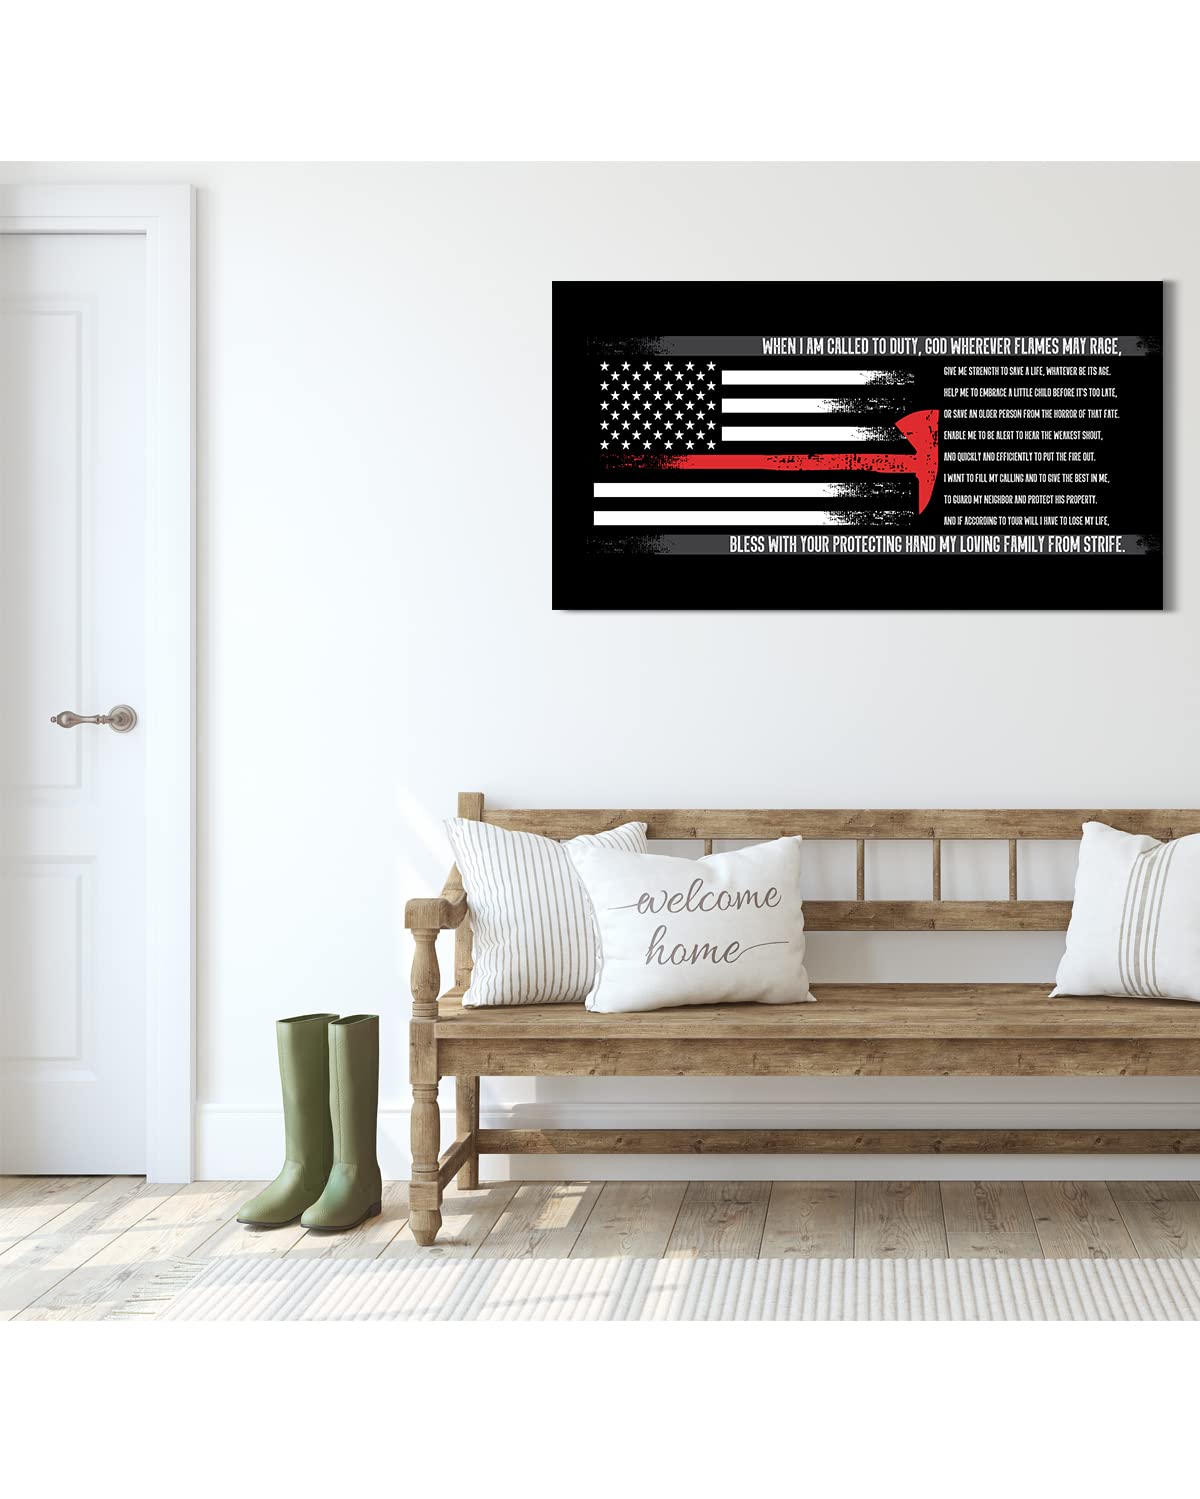 Firefighter's Prayer - Firefighter Gifts - First Responder Gifts - Appreciation Decor - Thin Red Line Flag - Gifts for Firemen or Women - First Responder Decor -